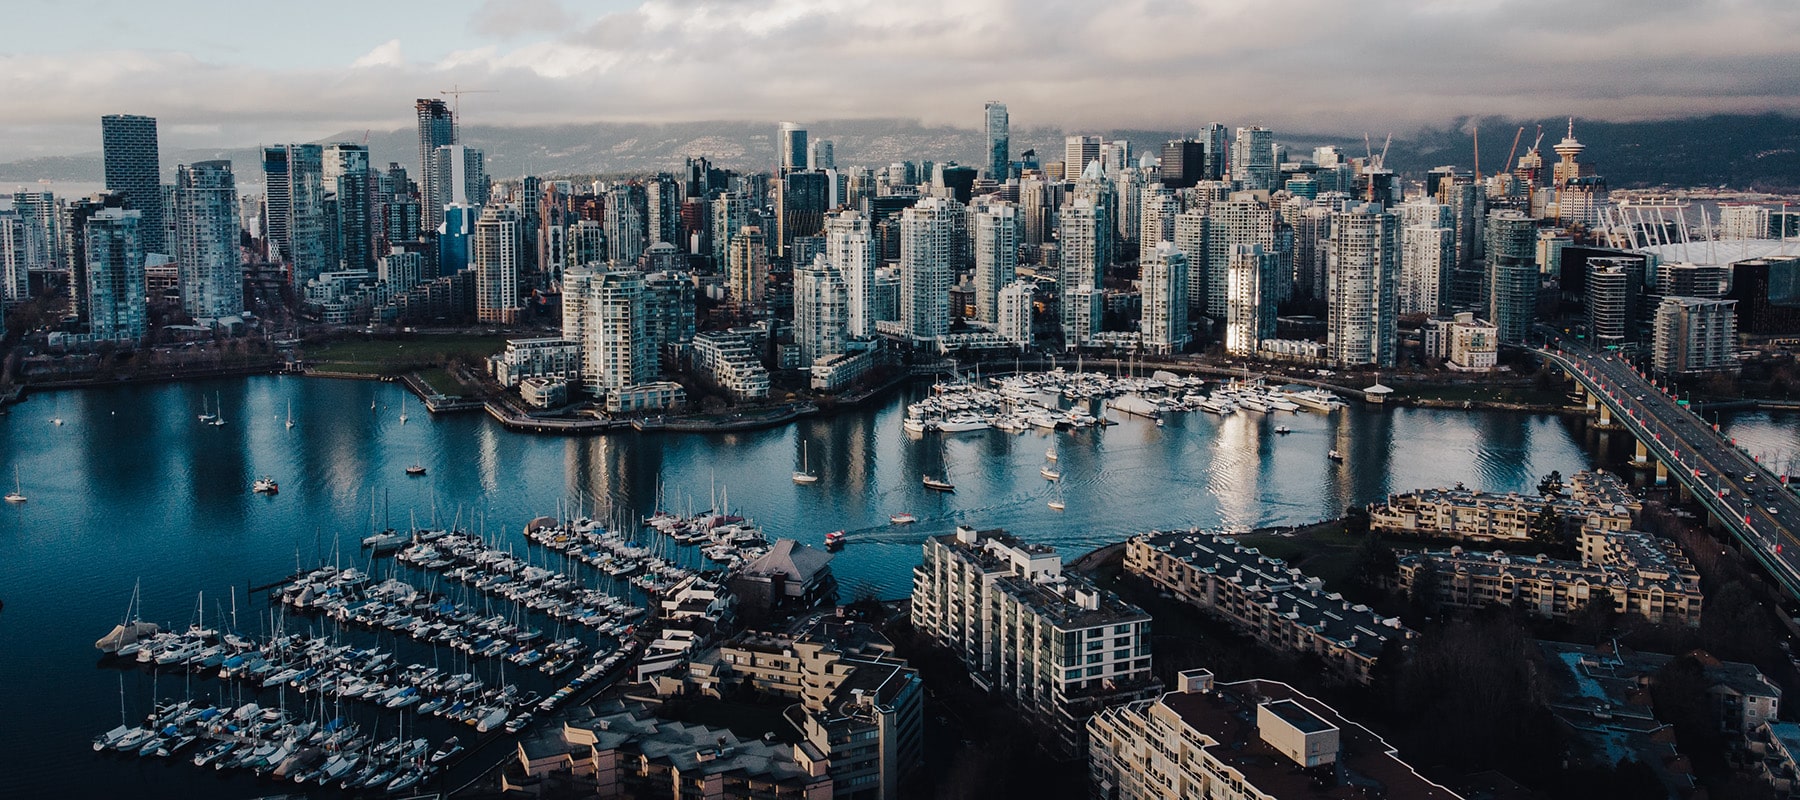 View of the skyline of Vancouver Canada, the city on which the focus of this travel diary entry is.